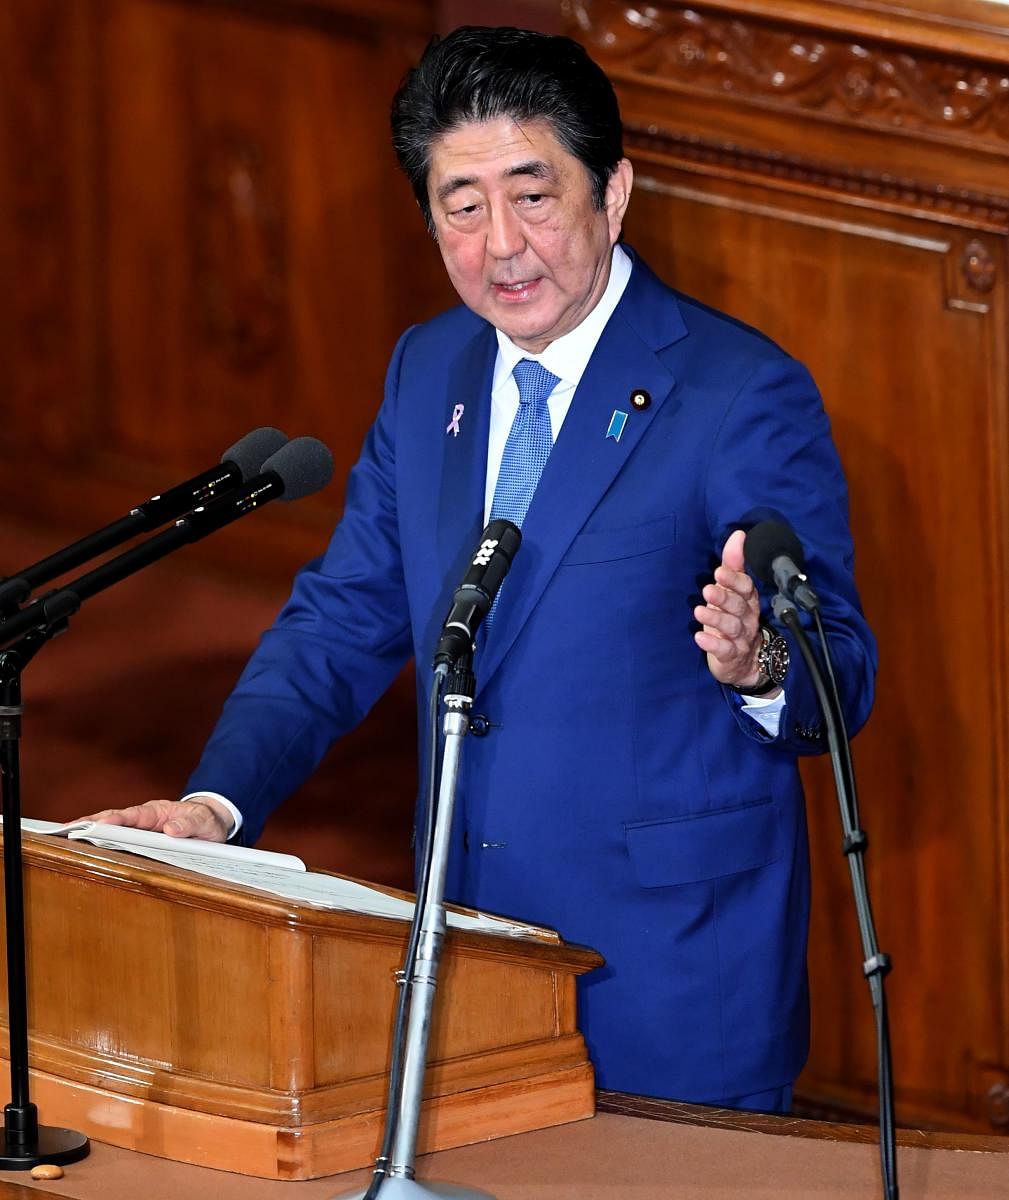 Japanese Prime Minister Shinzo Abe has said his country would take concrete actions